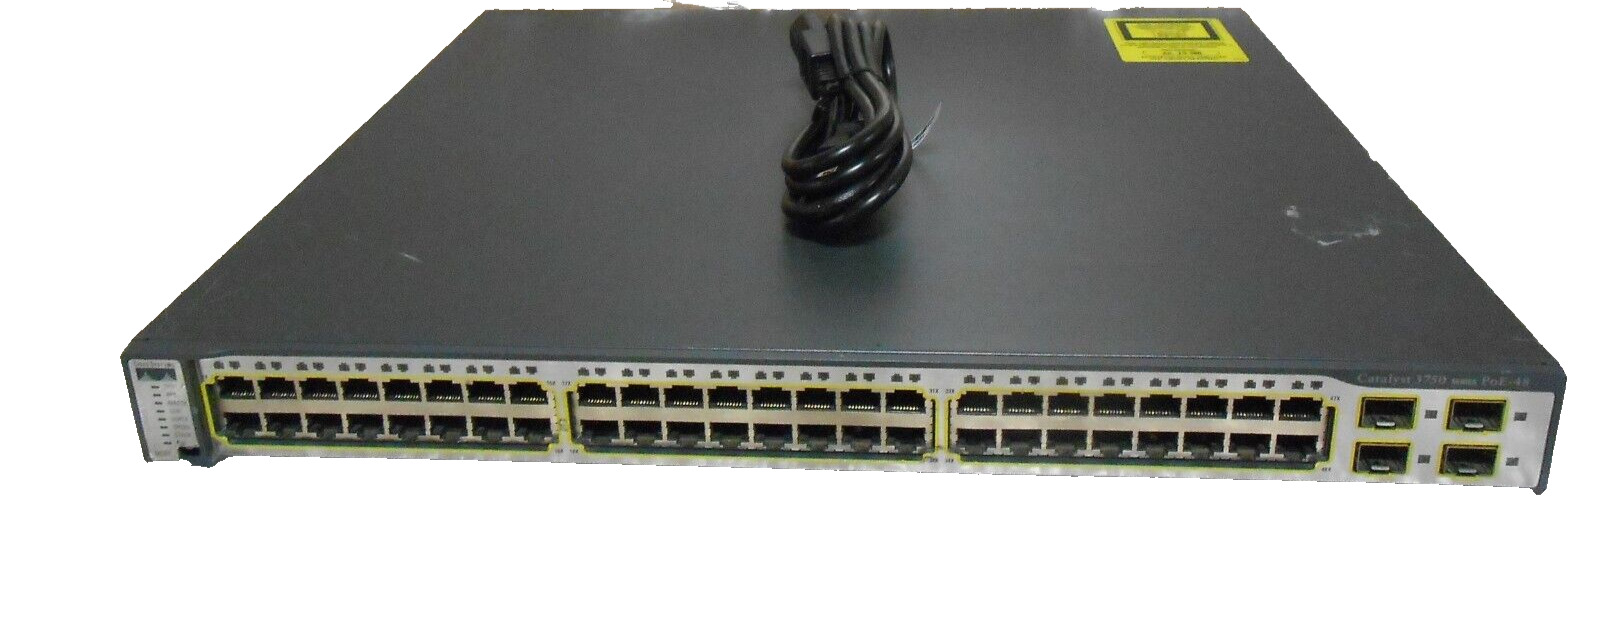 Cisco Catalyst 3750 Series 48 Port Ethernet Switch WS-C3750-48PS-S